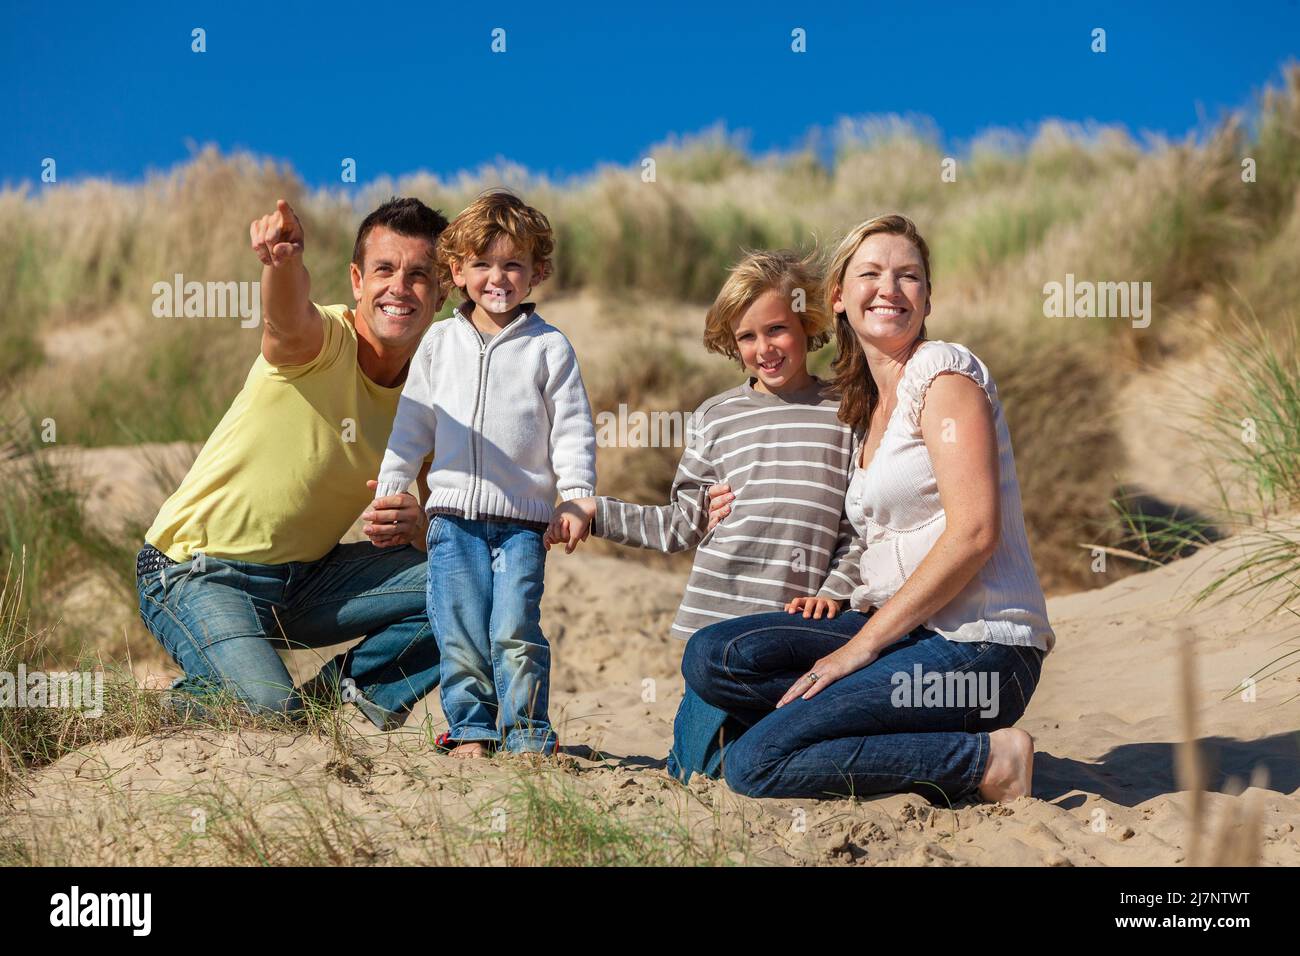 Happy family of mother, father and two sons, man woman children on vacation, having fun in the sand dunes of a sunny beach Stock Photo